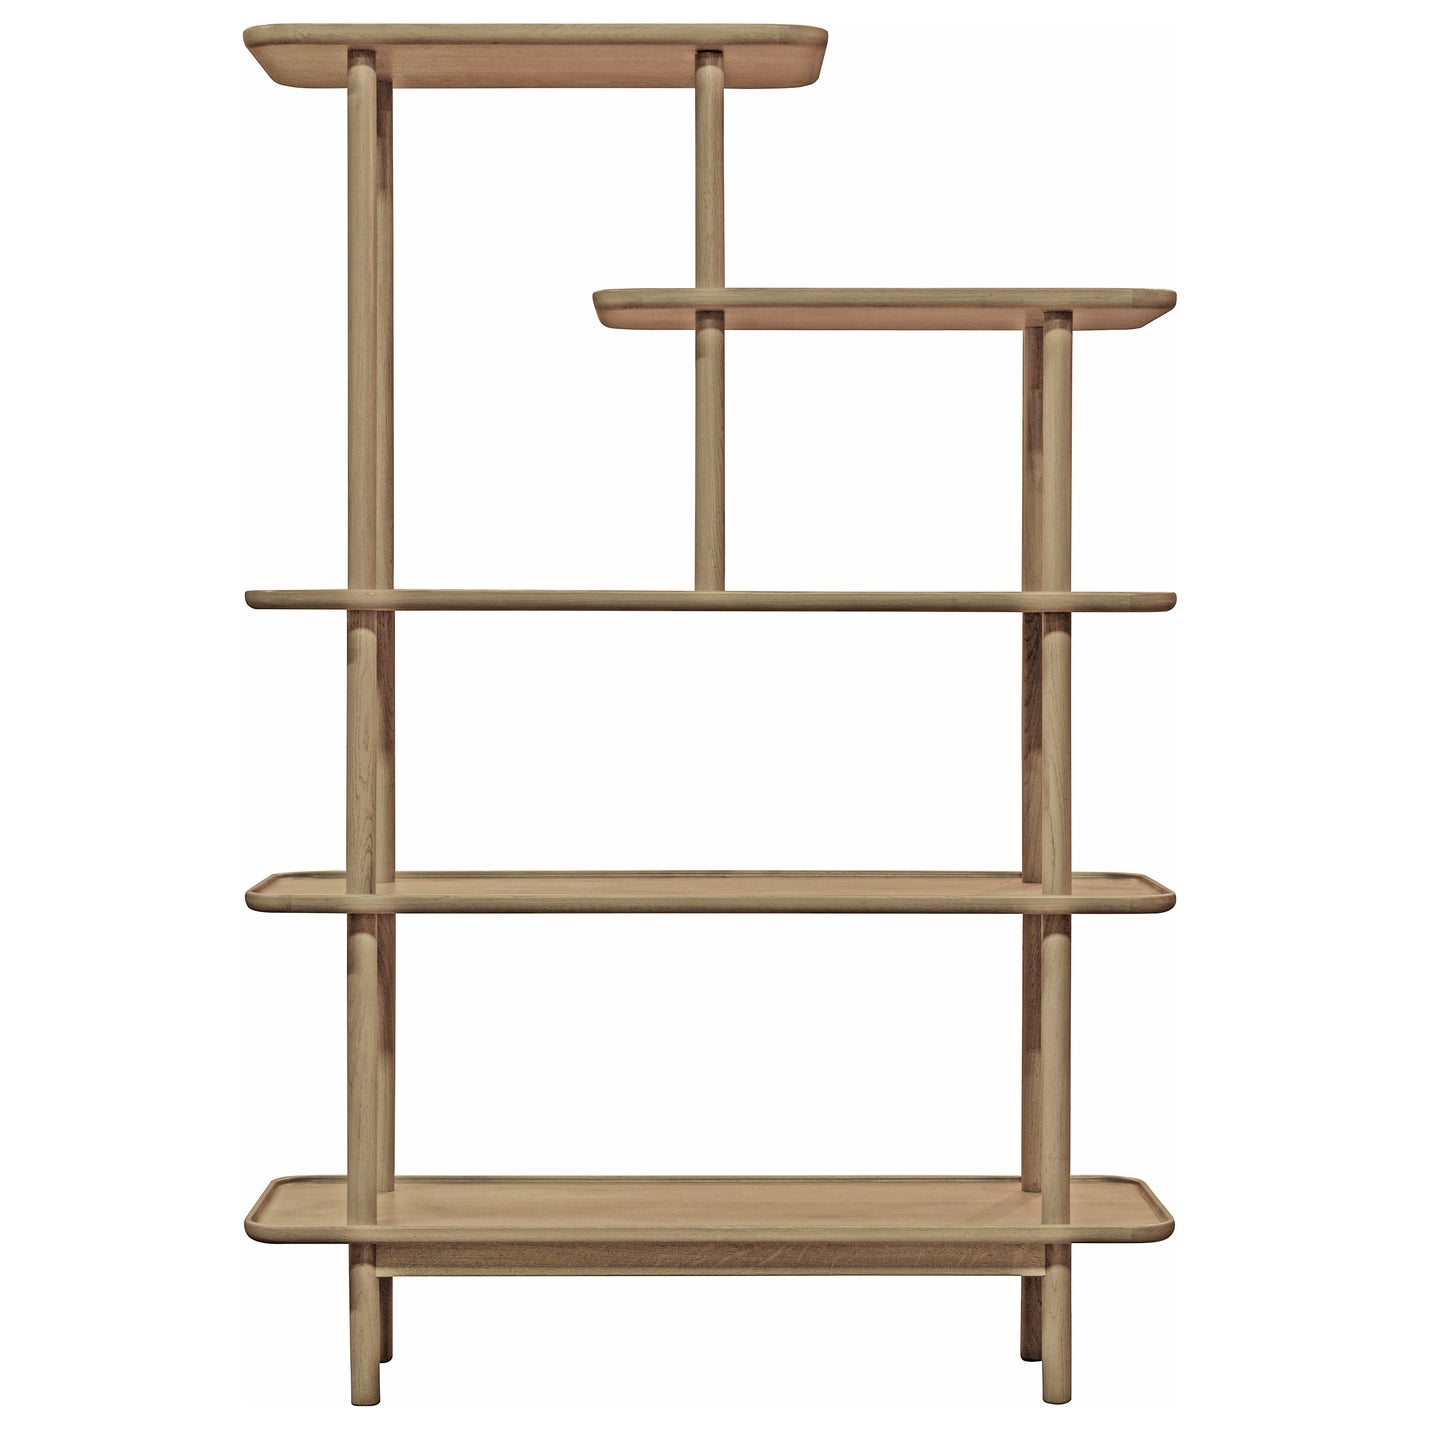 A Wembury Open Display 1100x380x1600mm shelf with three shelves on it for interior decor from Kikiathome.co.uk.